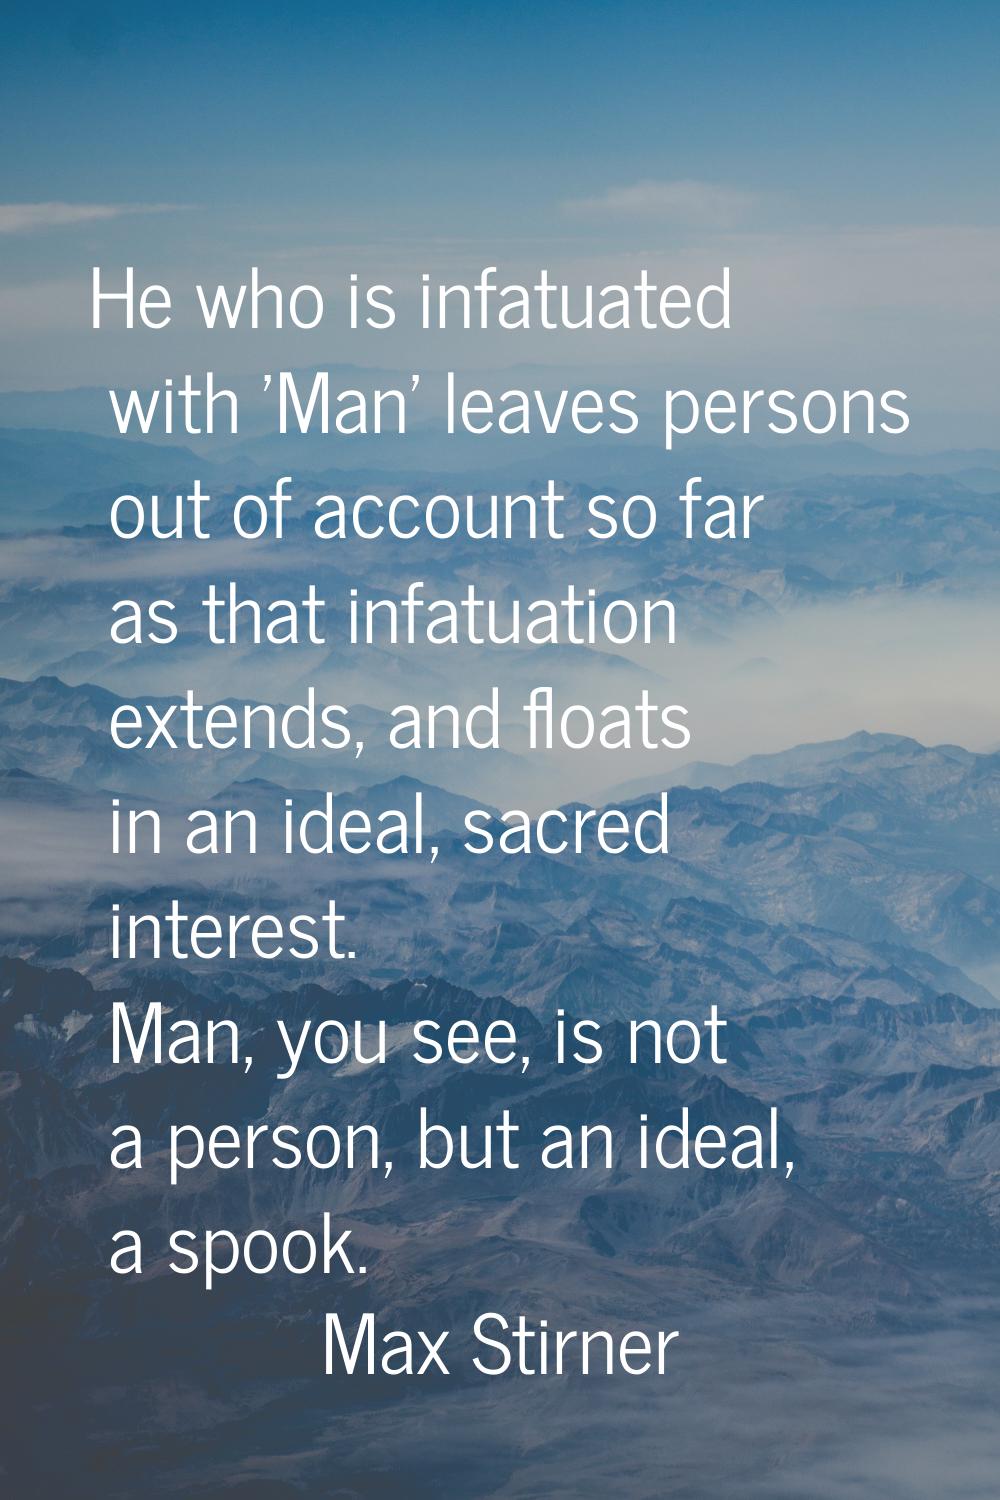 He who is infatuated with 'Man' leaves persons out of account so far as that infatuation extends, a